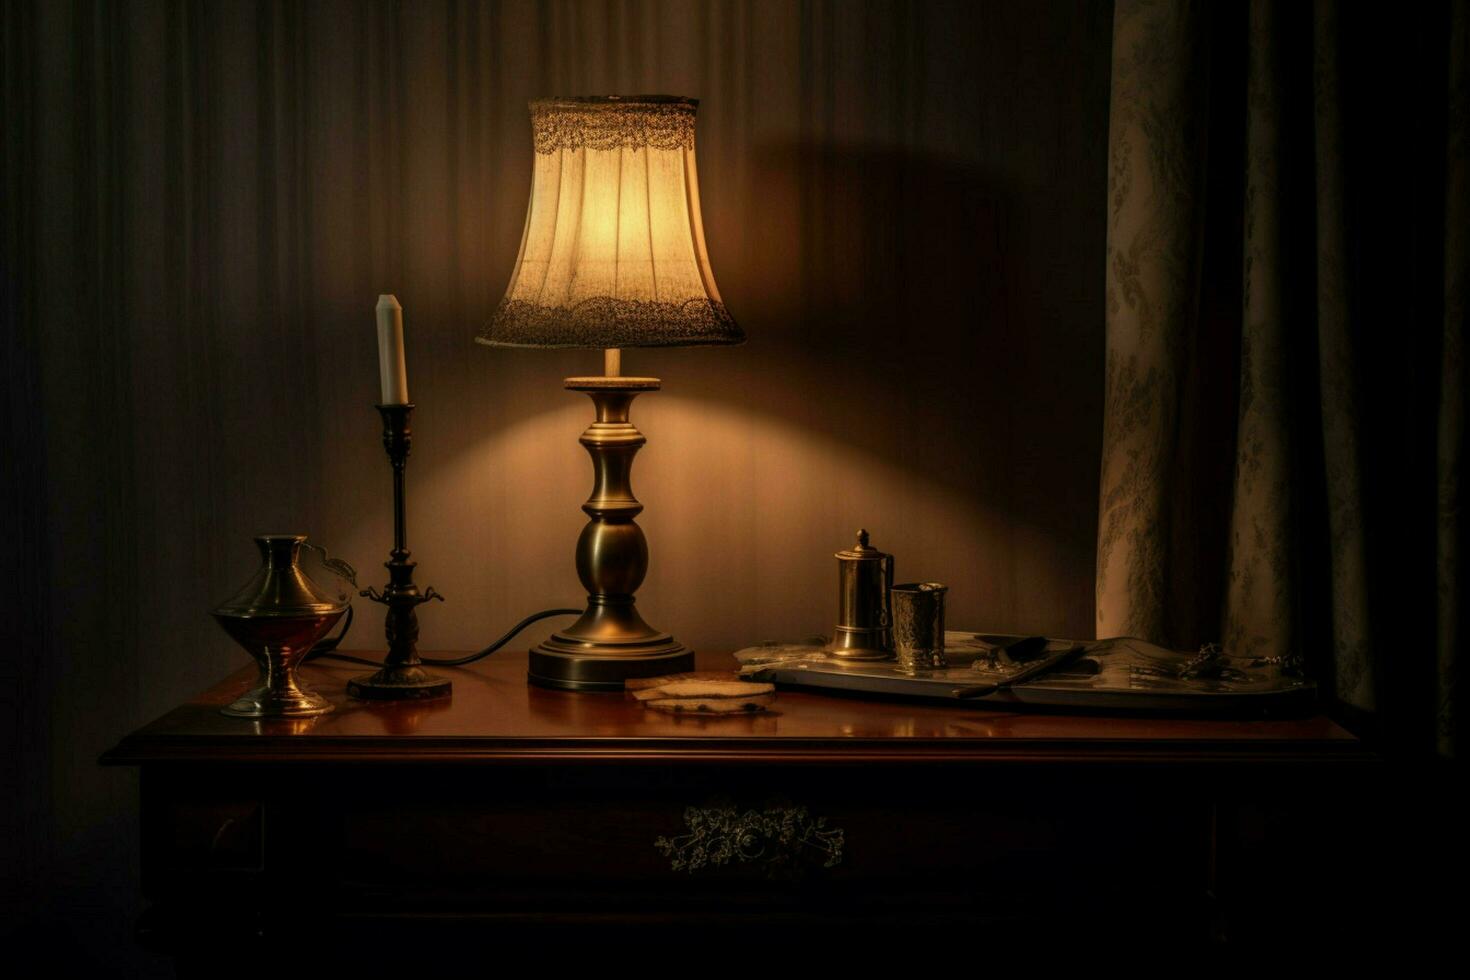 a lamp and a candle are next to a lamp that is on photo